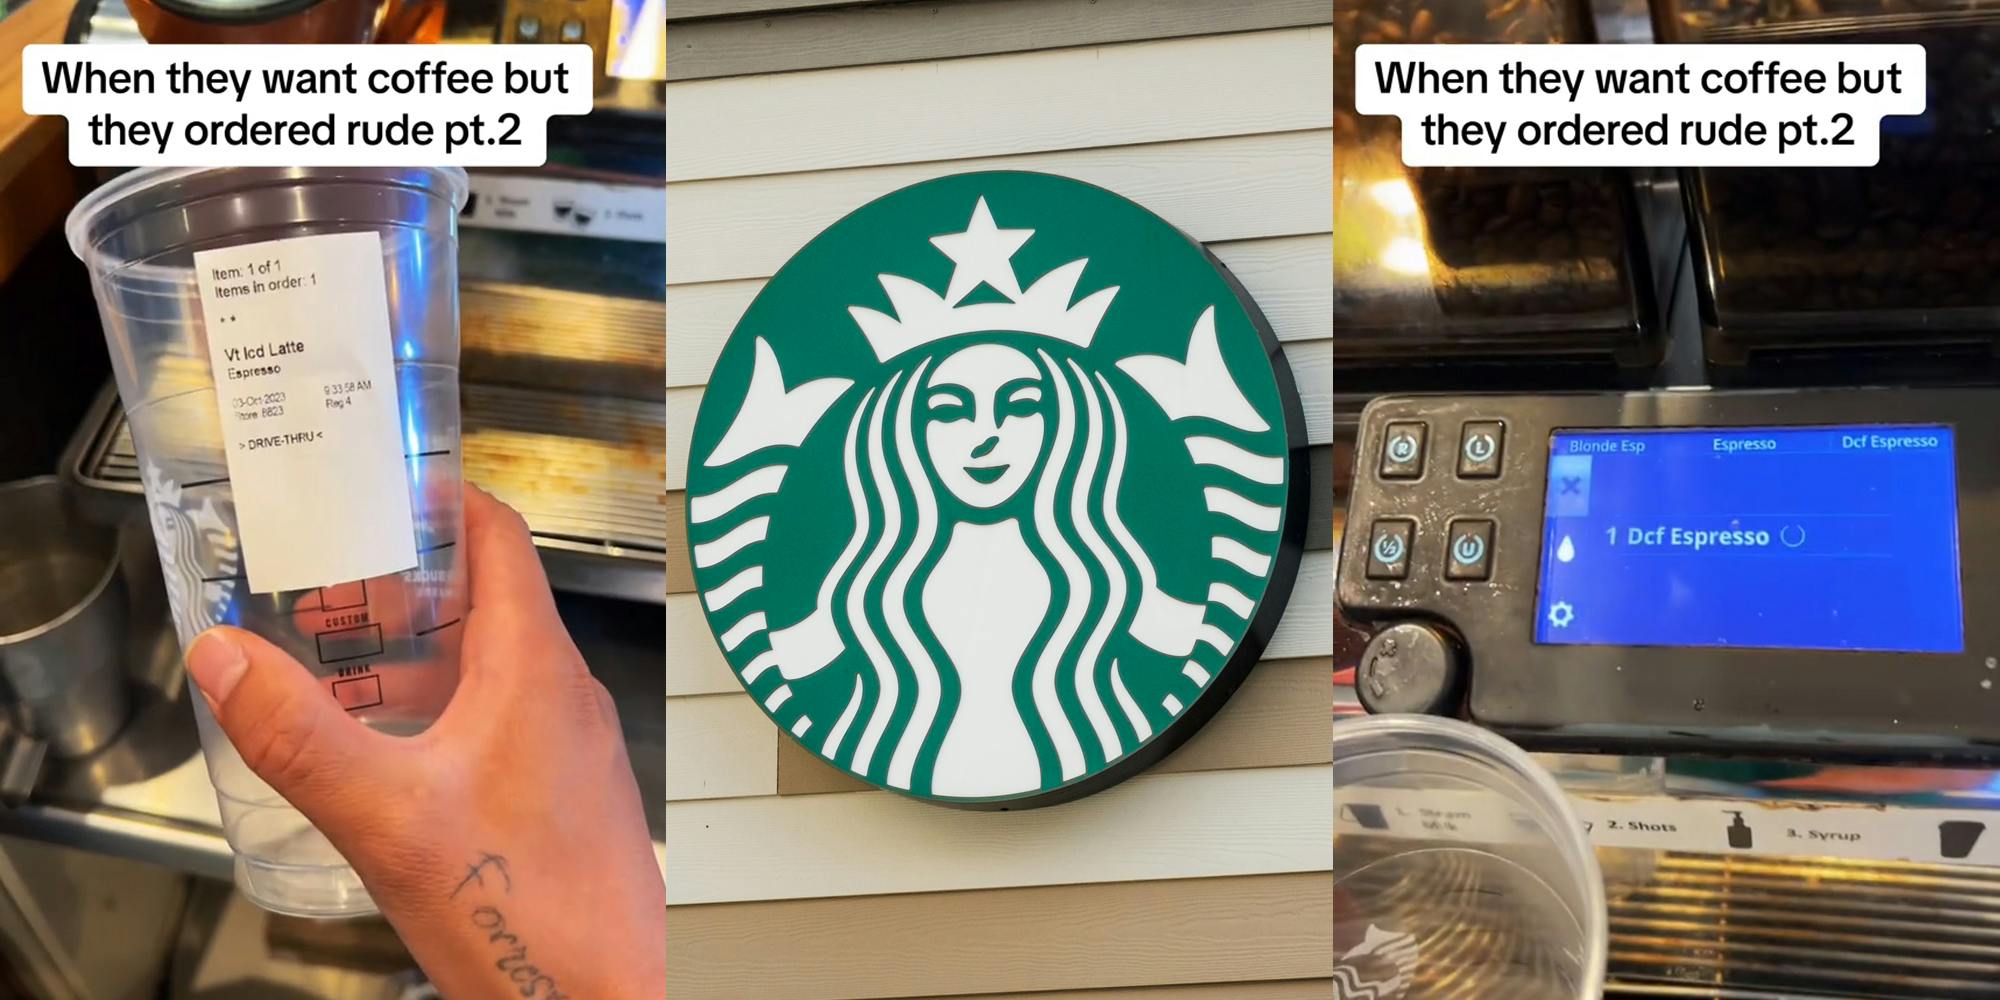 Starbucks barista with cup with caption "When they want coffee but they ordered rude" (l) Starbucks circular sign on building (c) Starbucks barista making decaffeinated espresso with caption "When they want coffee but they ordered rude" (r)